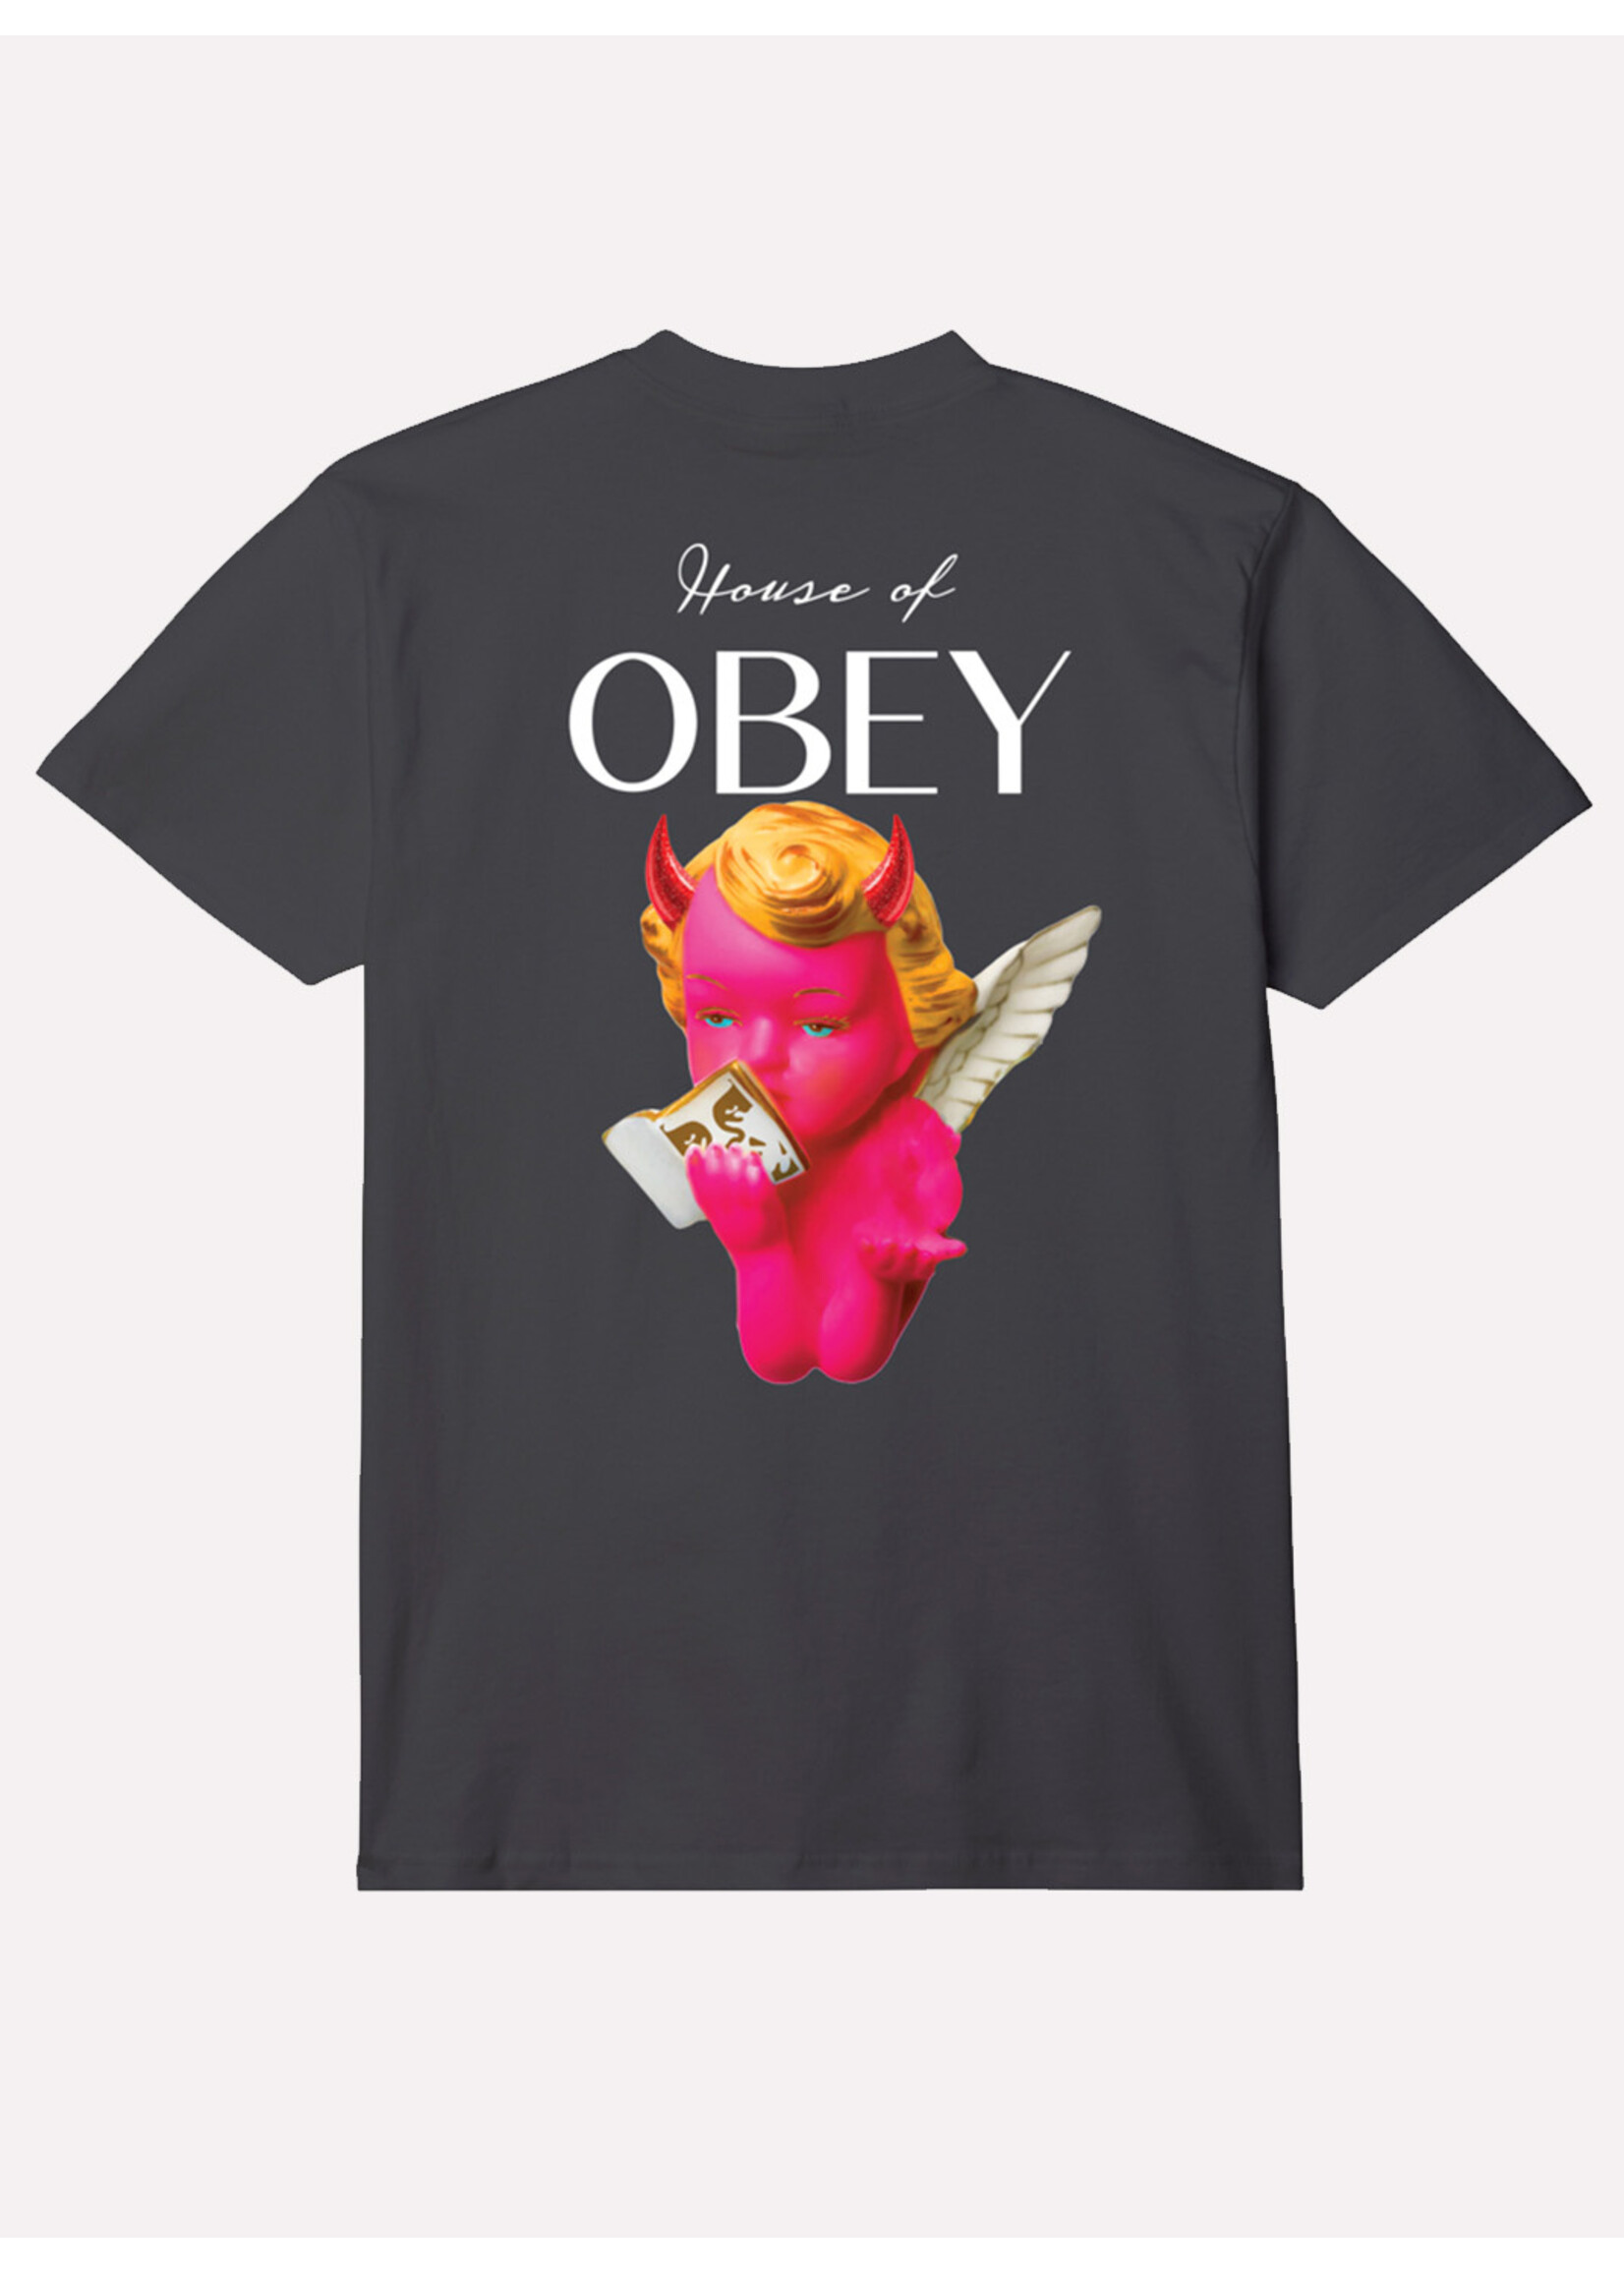 Obey House of Obey Tee Black 165263753-BLK